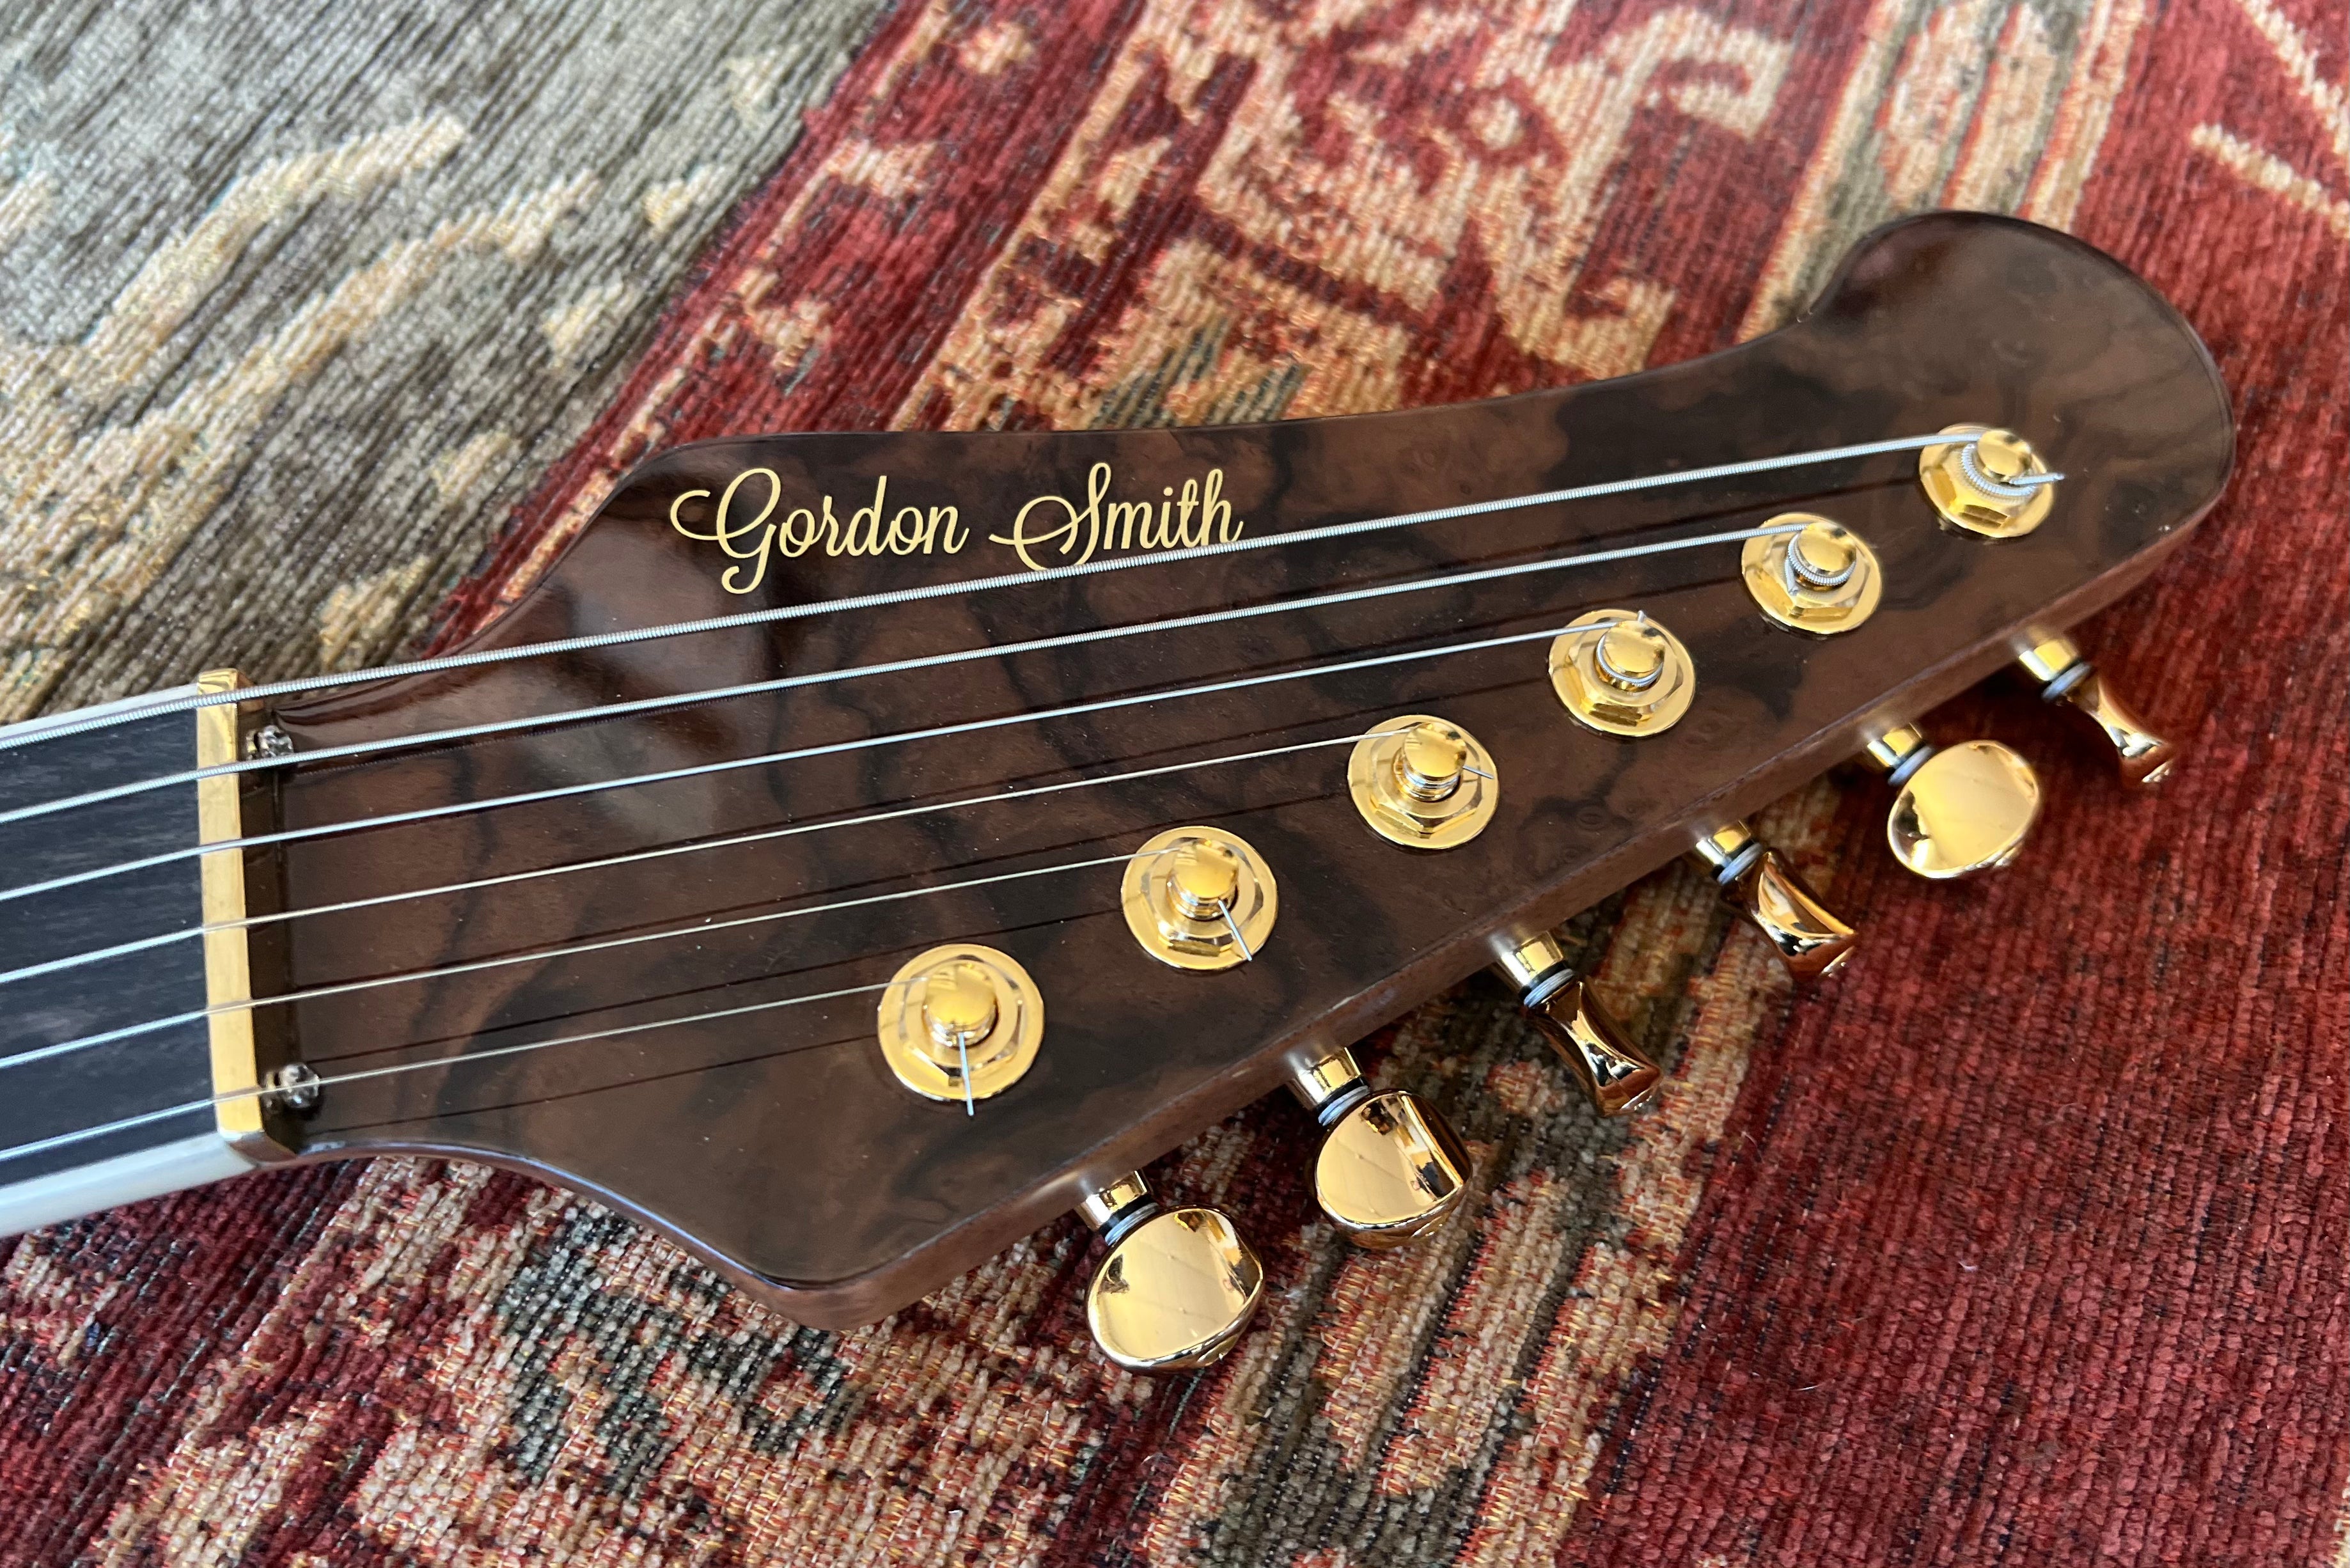 Gordon Smith Griffin Deluxe Burled Walnut Custom, Electric Guitar for sale at Richards Guitars.